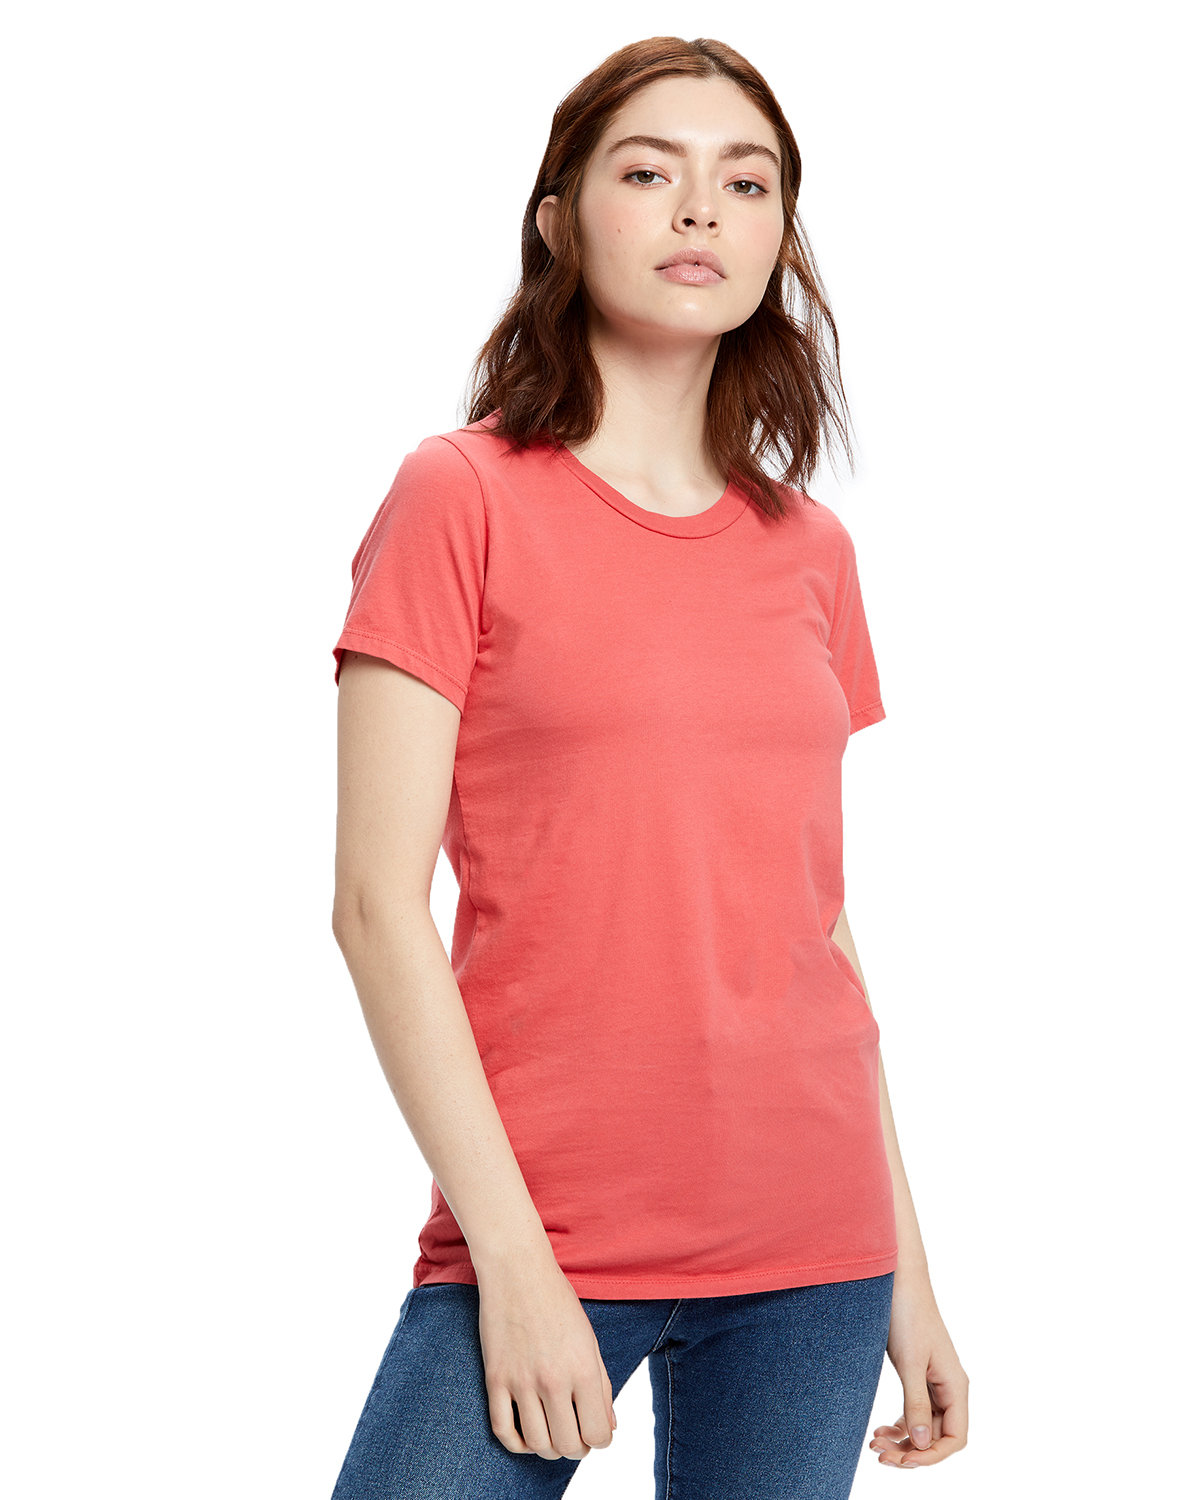 US Blanks Ladies' Made in USA Short Sleeve Crew T-Shirt CORAL 